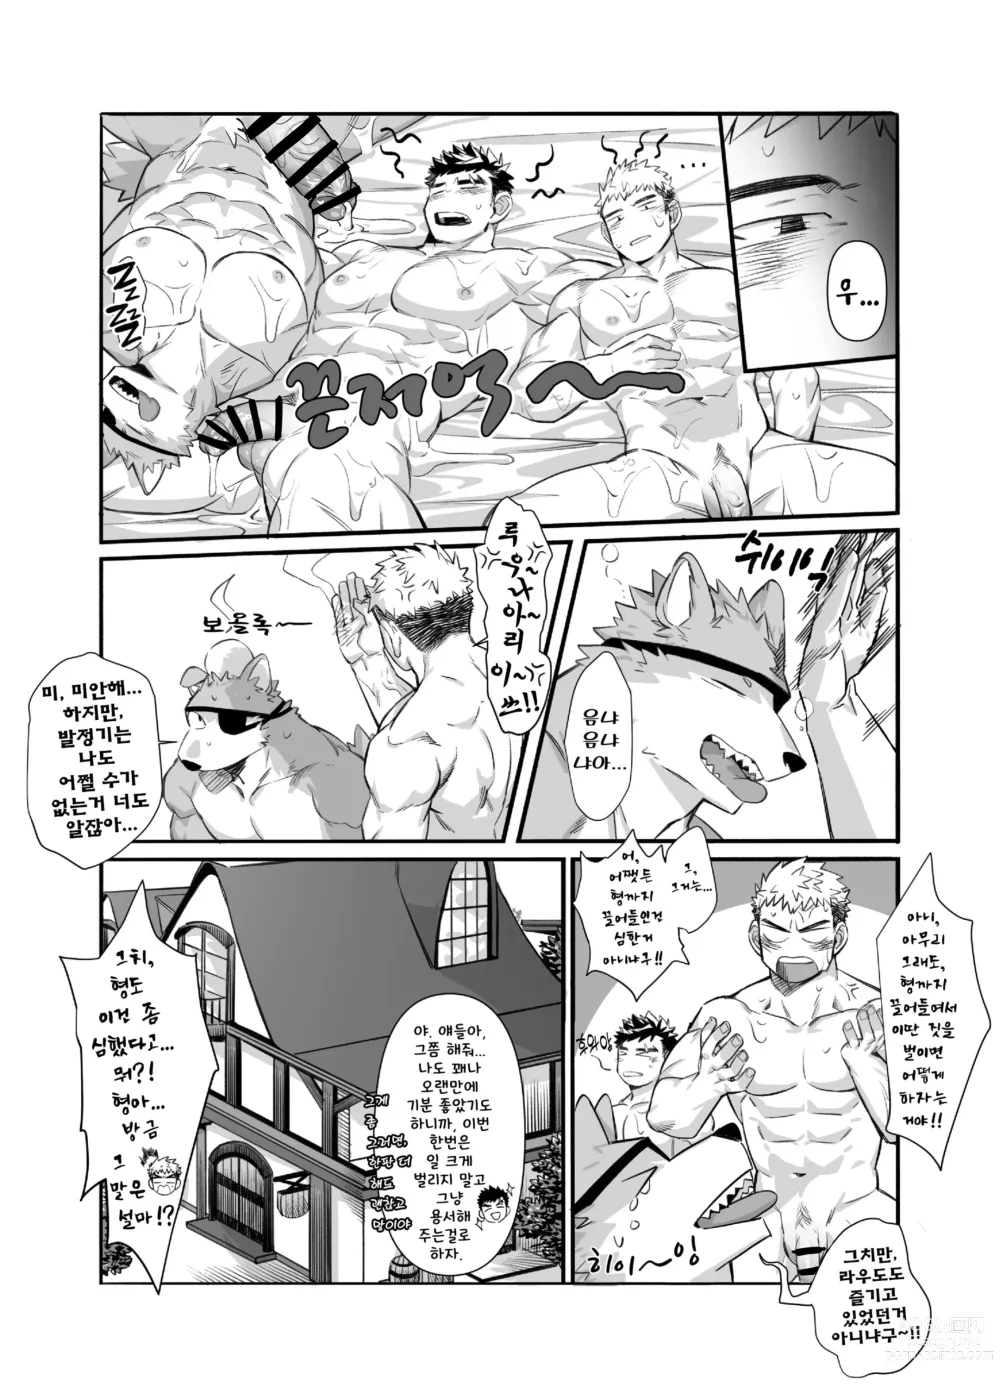 Page 19 of doujinshi Bros. in Heat